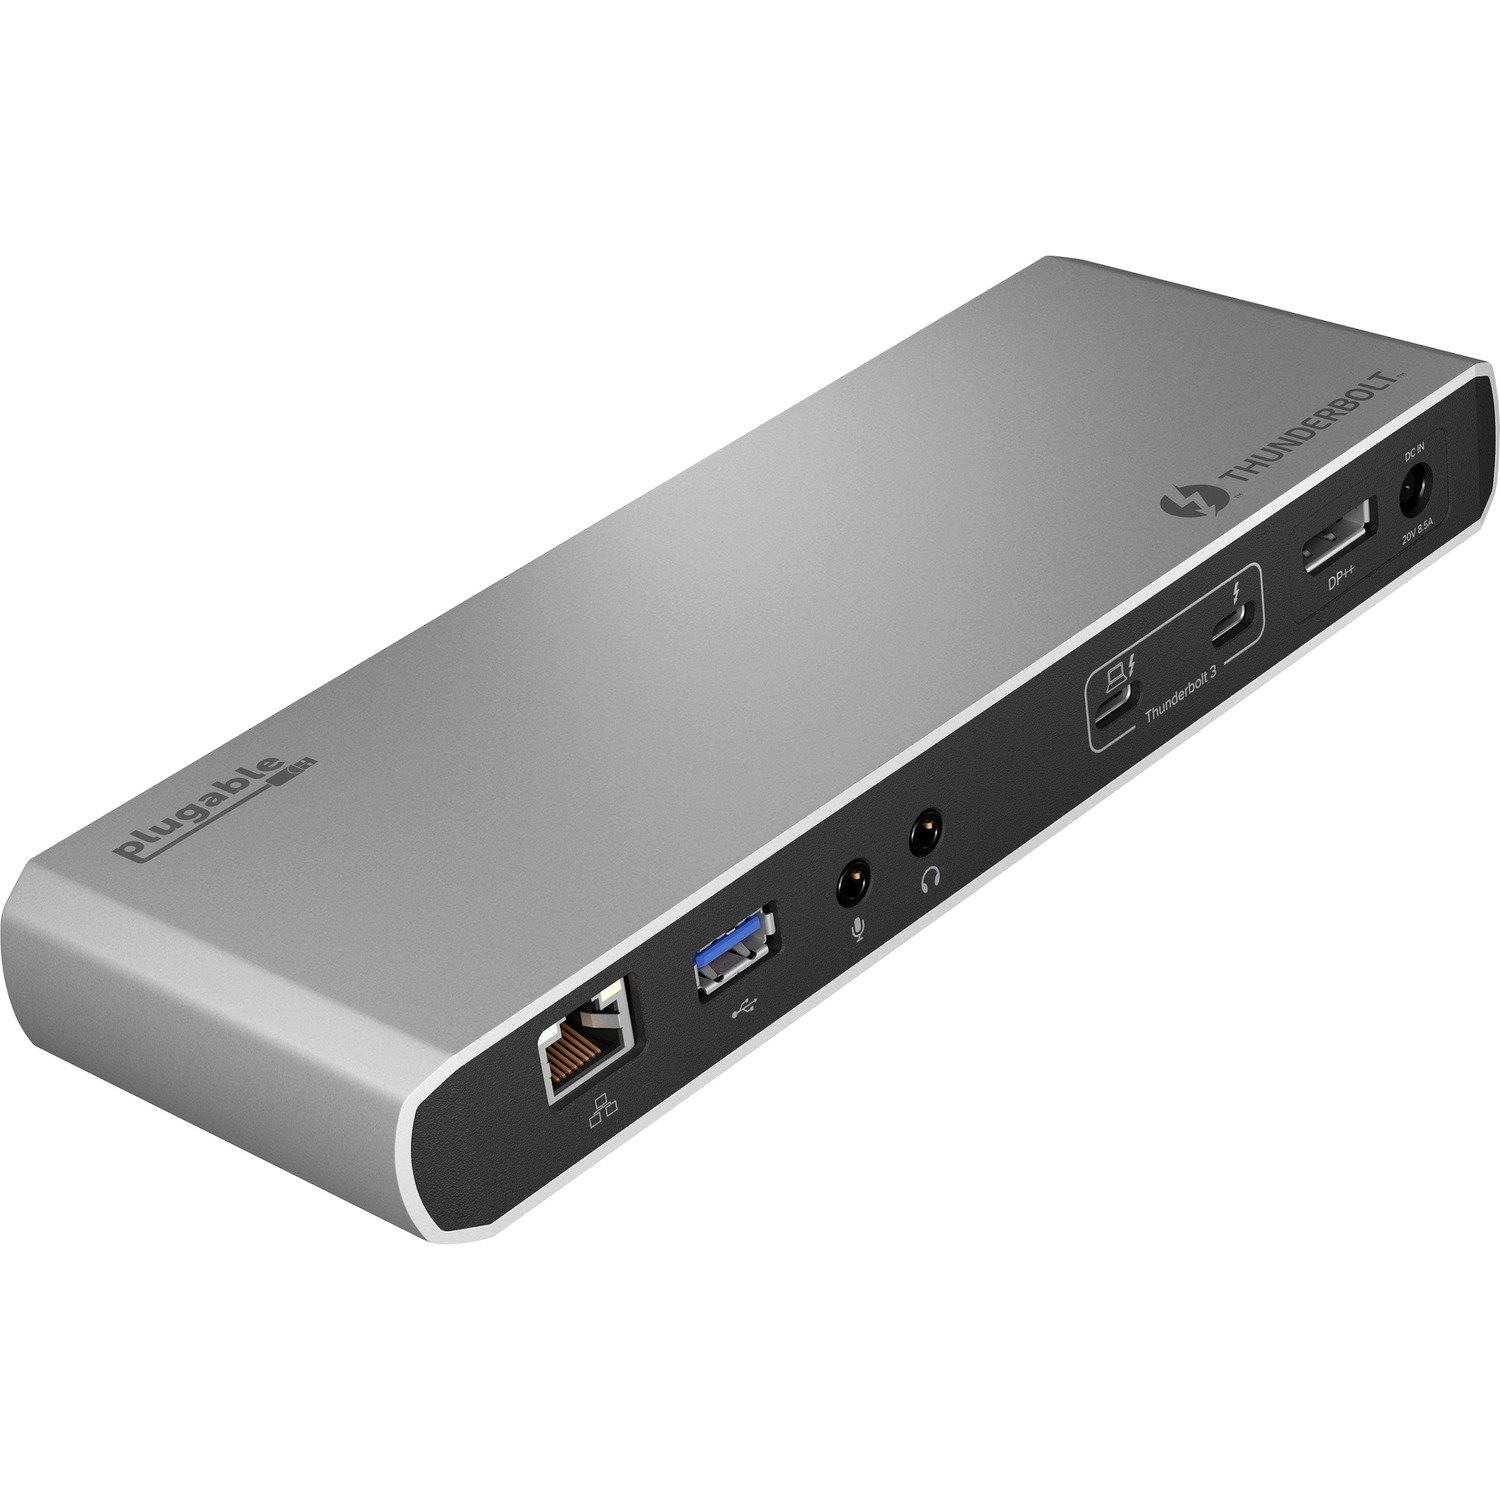 Plugable Thunderbolt 3 Dock Compatible with MacBook Pro and Thunderbolt 3 PCs